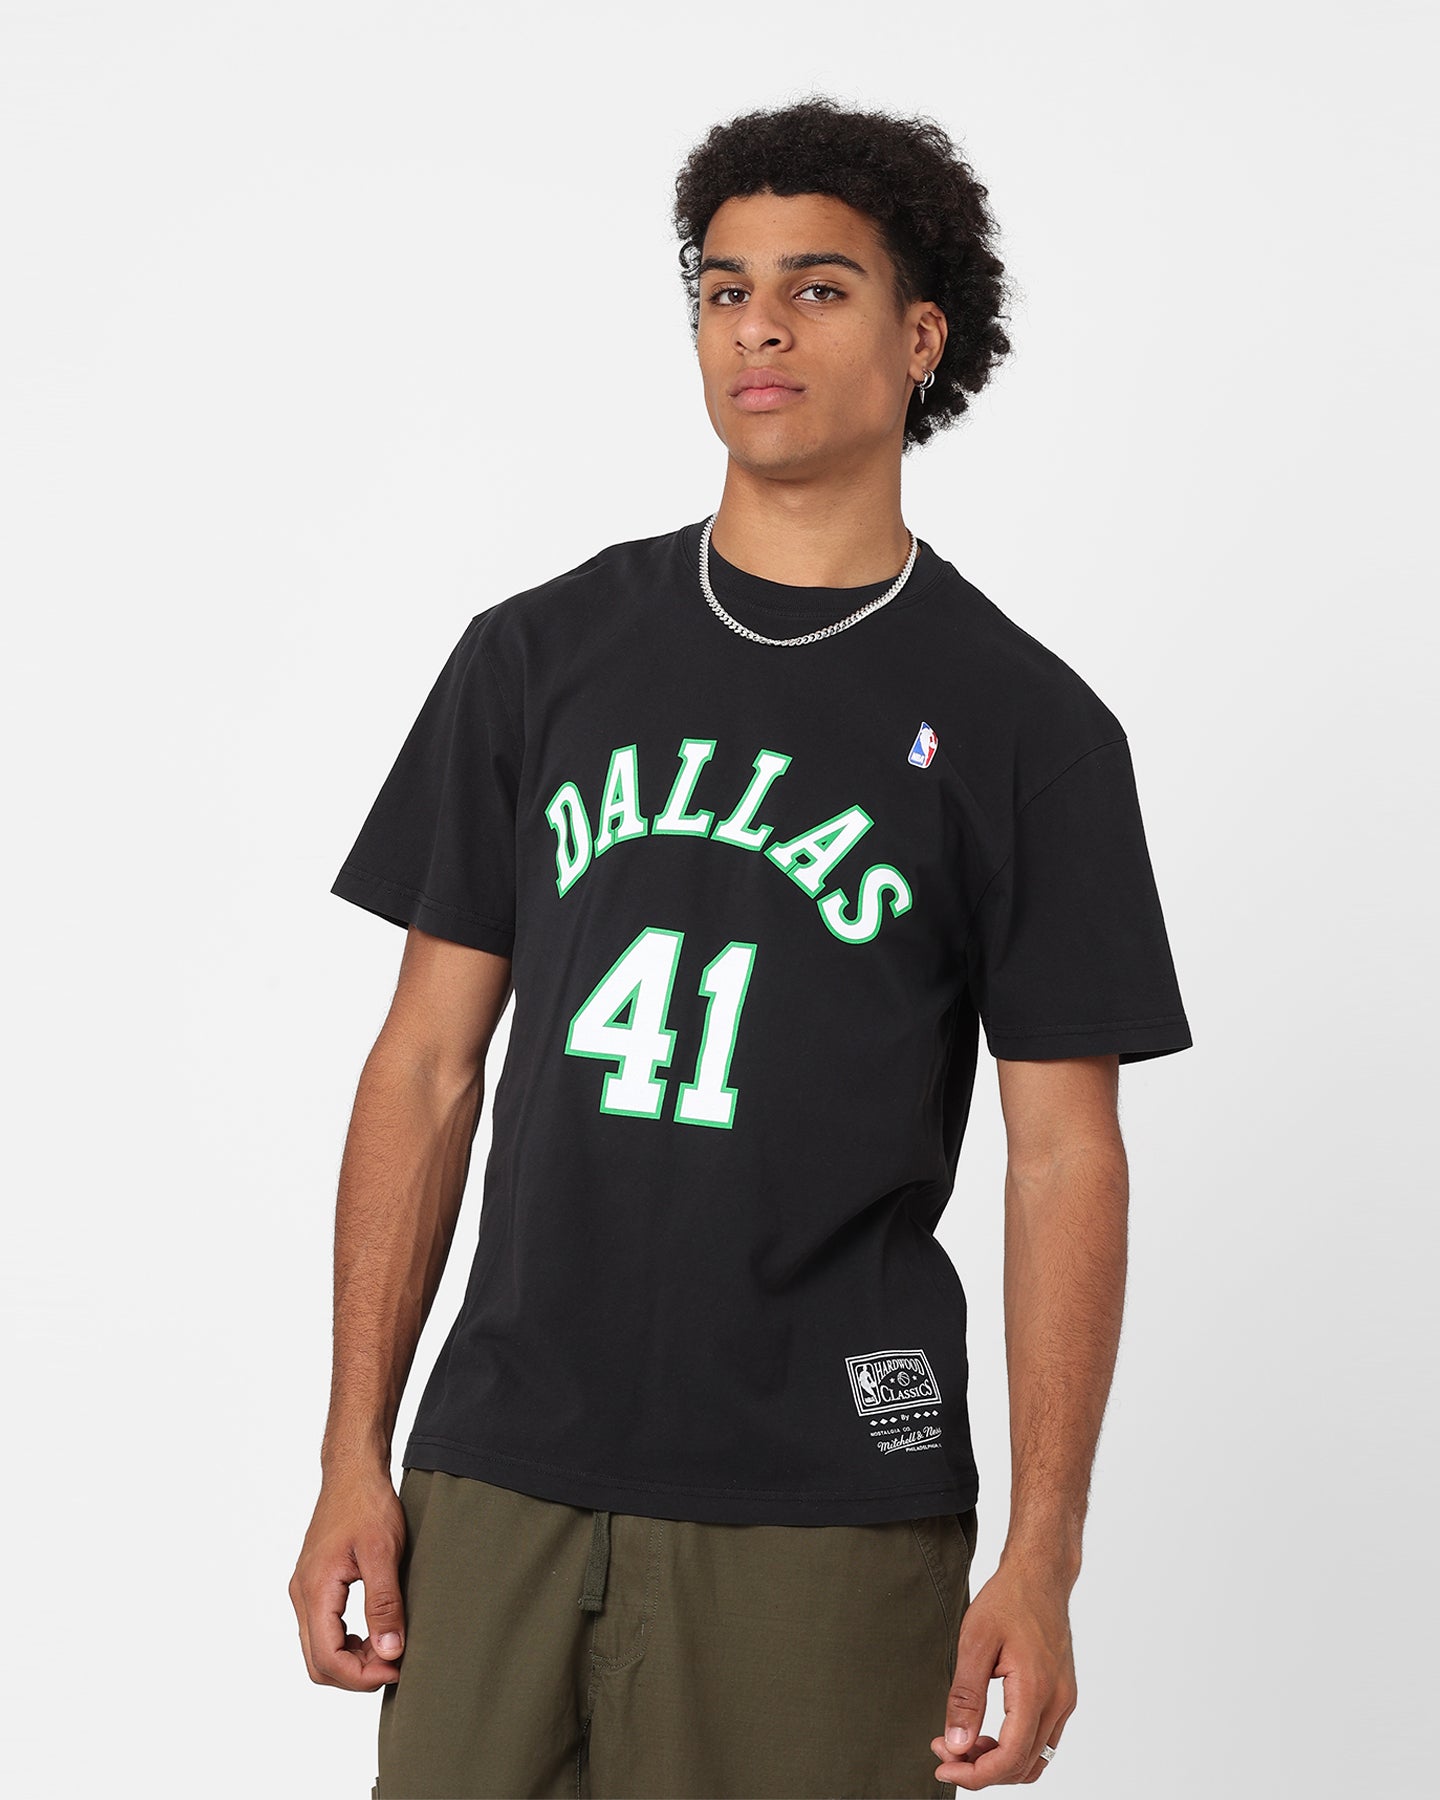 Mitchell and Ness t-shirt Player Name & Number Traditional Allen Iverson  Philadelphia 76ers black  CLOTHES & ACCESORIES \ T-Shirts \ T-Shirts  BASKETBALL \ NBA EASTERN CONFERENCE \ Philadelphia 76ers BRANDS \